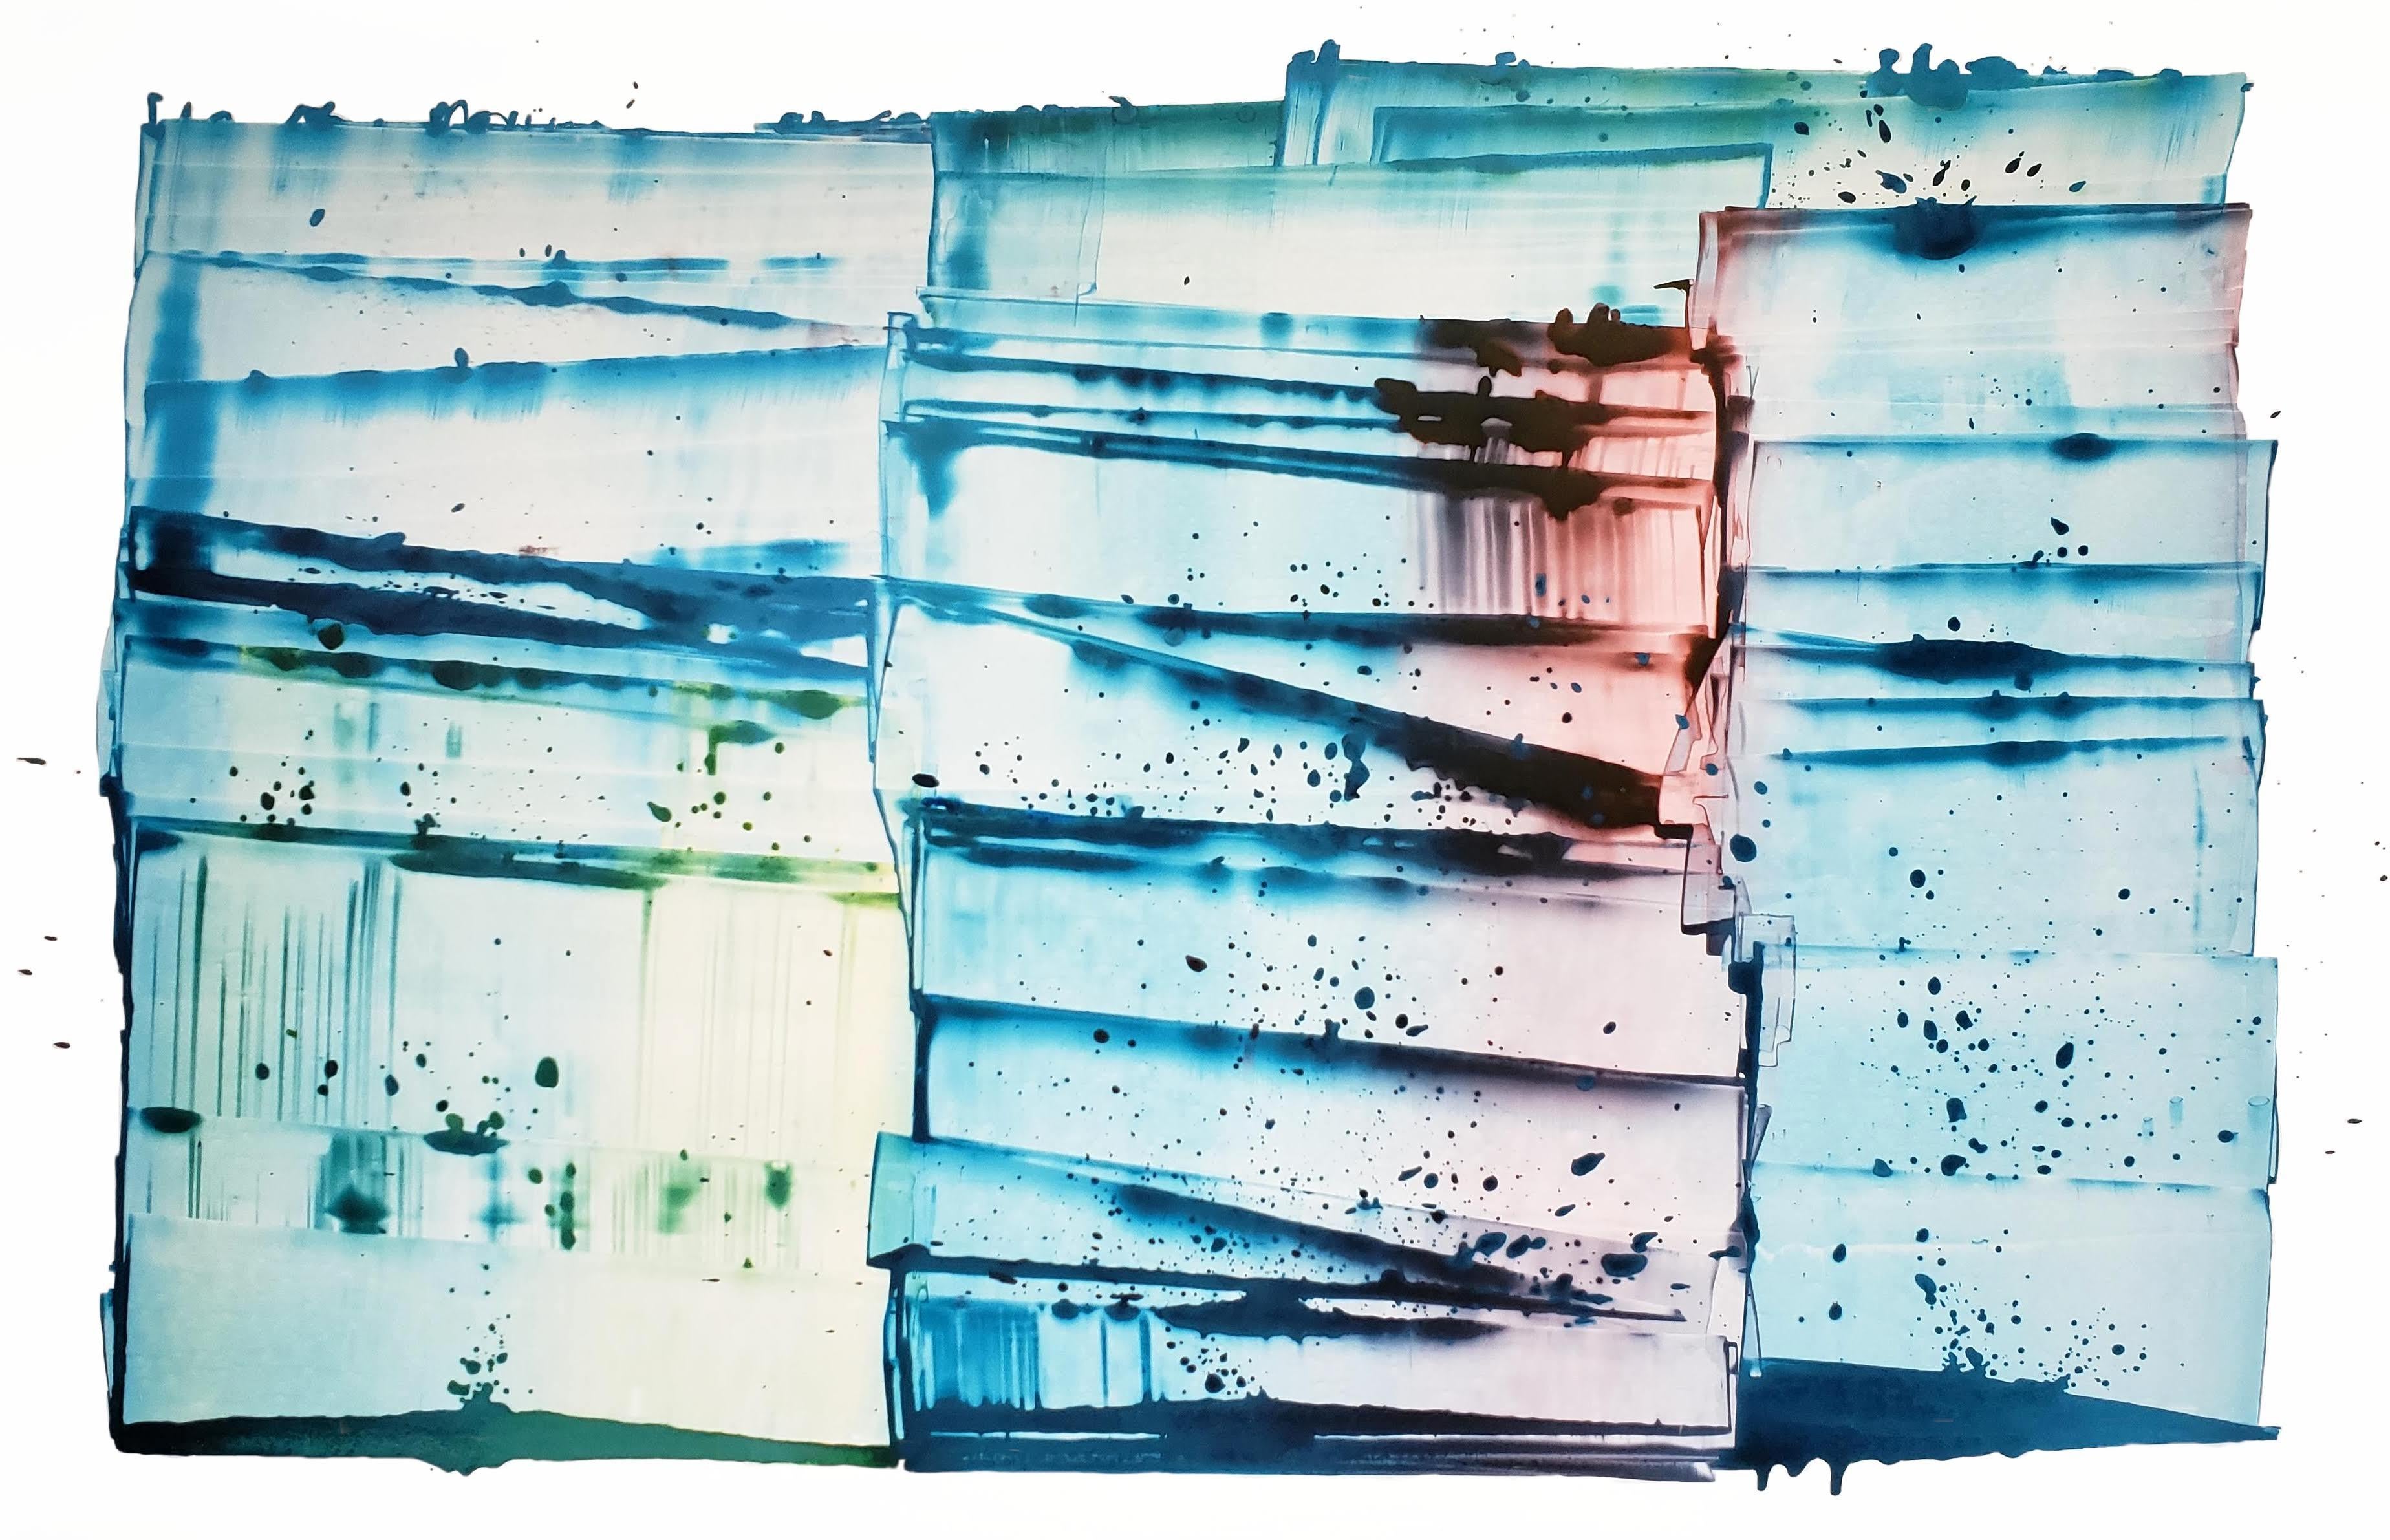 Sarah Irvin
I Have Some, 2019
ink on Yupo paper
30 1/2 x 47 in.

This original abstract ink painting on Yupo paper by Sarah Irvin features bold translucent shades of turquoise, blue, green, and red.

Sarah Irvin creates dynamic, rich images that